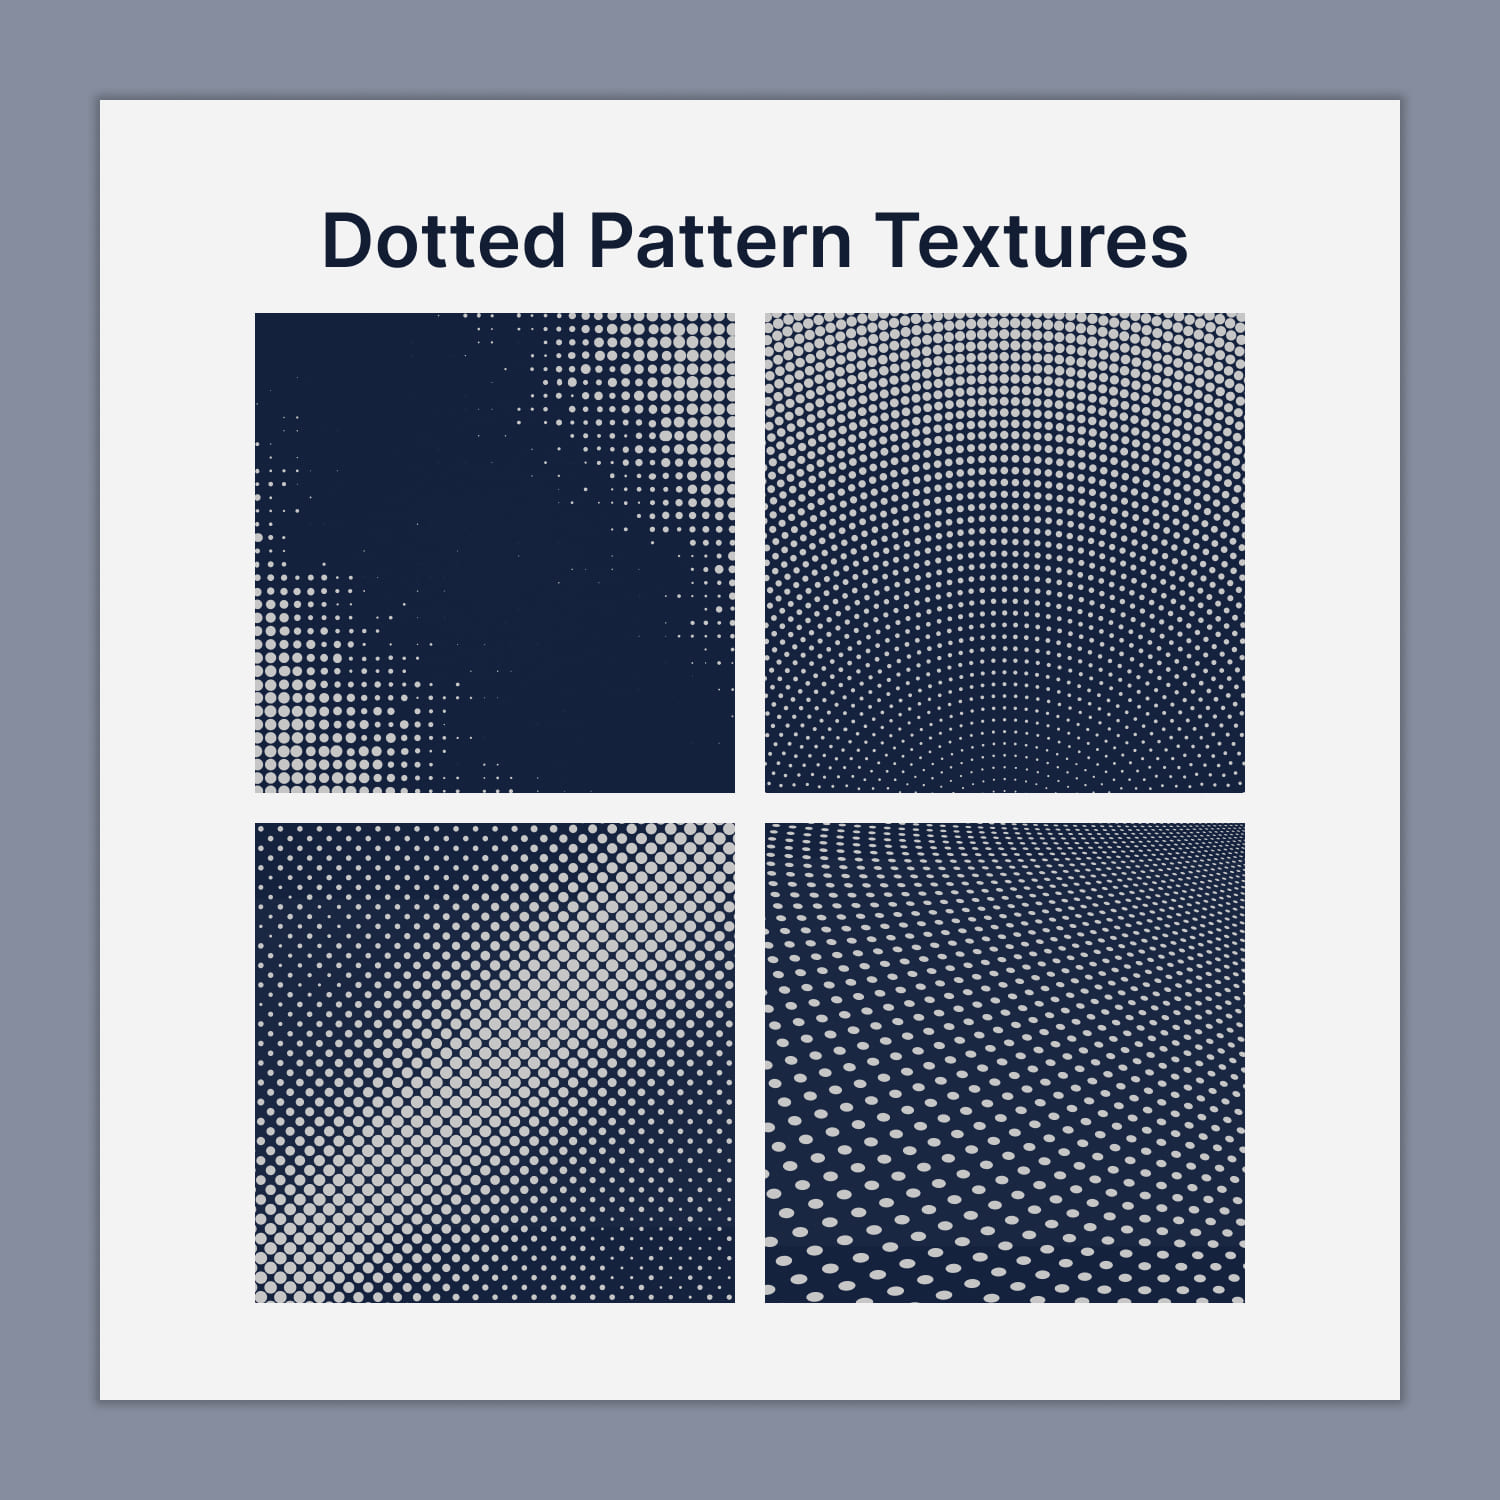 dotted pattern textures.